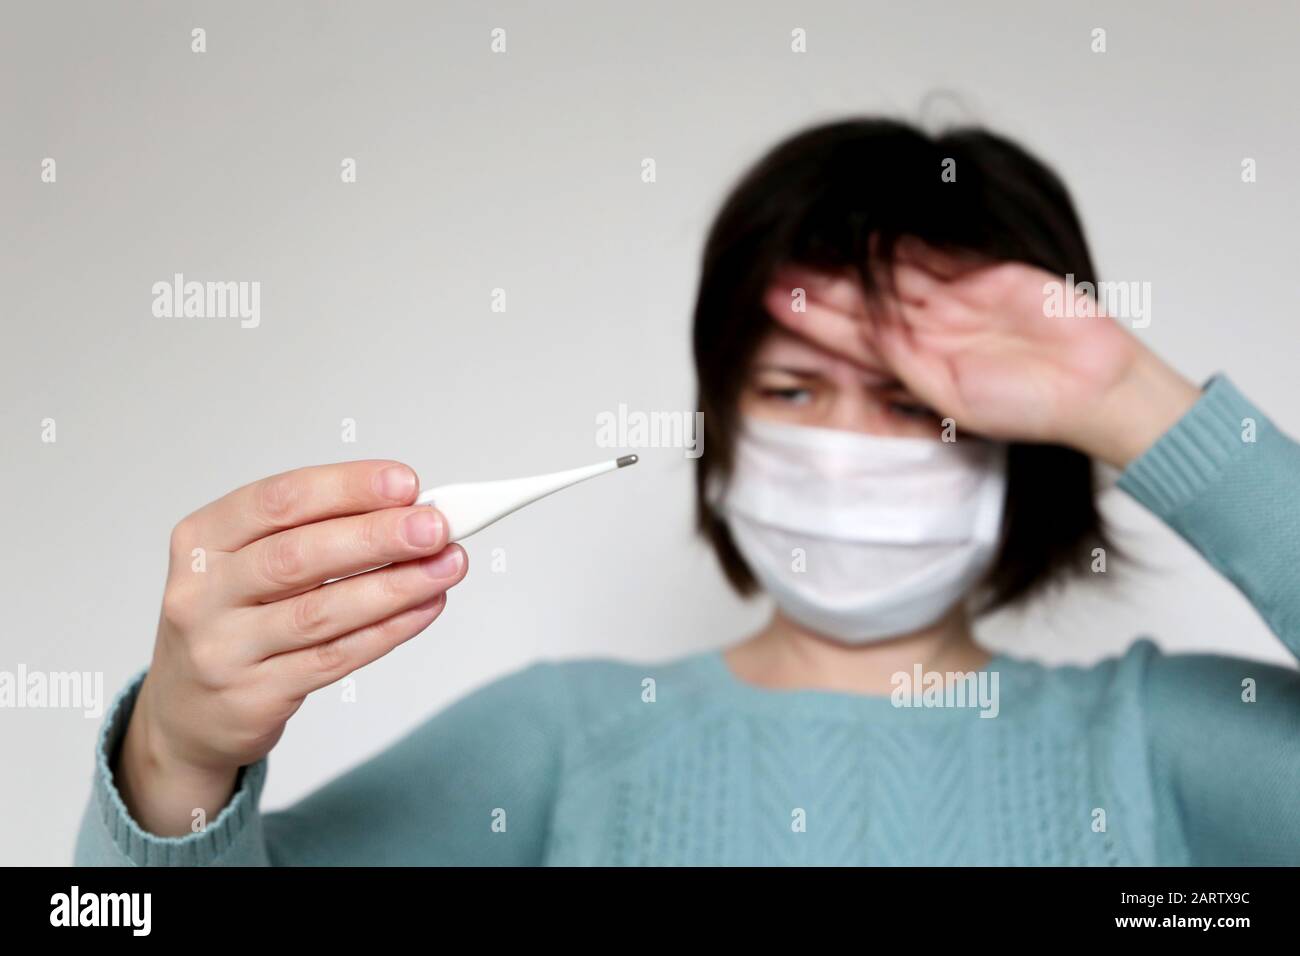 Fever and coronavirus symptoms, woman measures body temperature. Worried girl in medical mask with thermometer Stock Photo